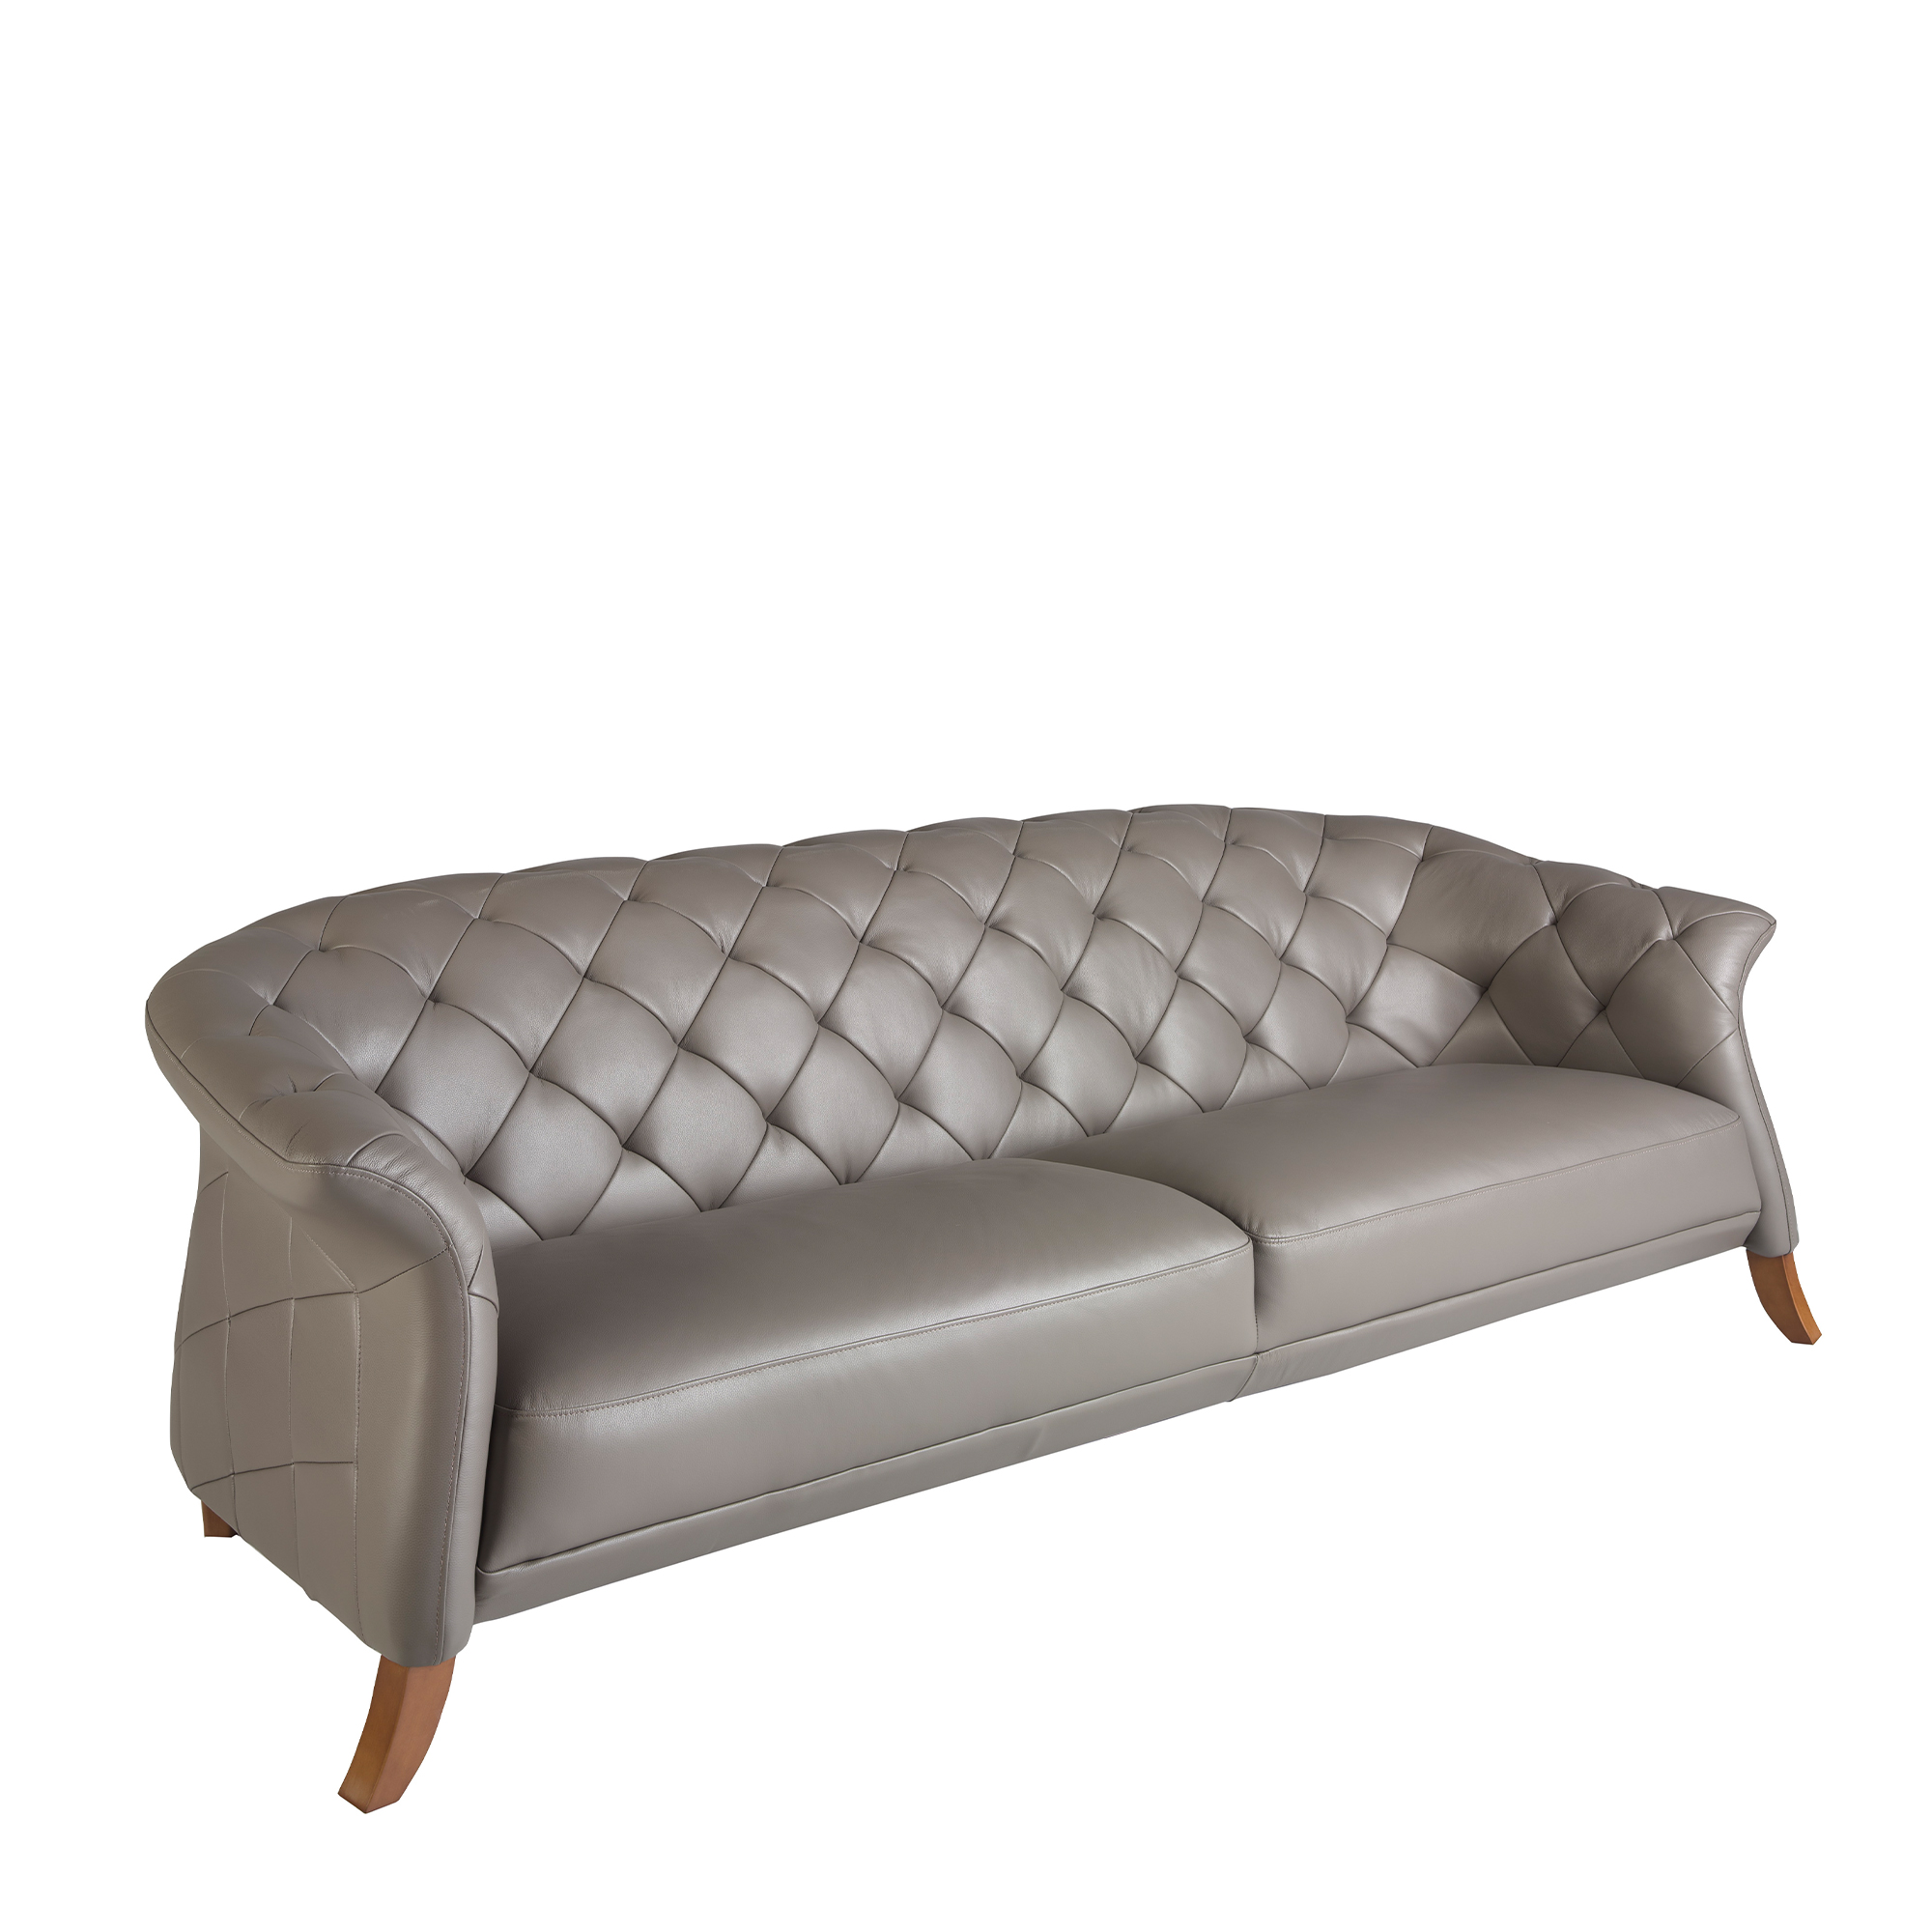 Chester sofa 3 seater grey leather